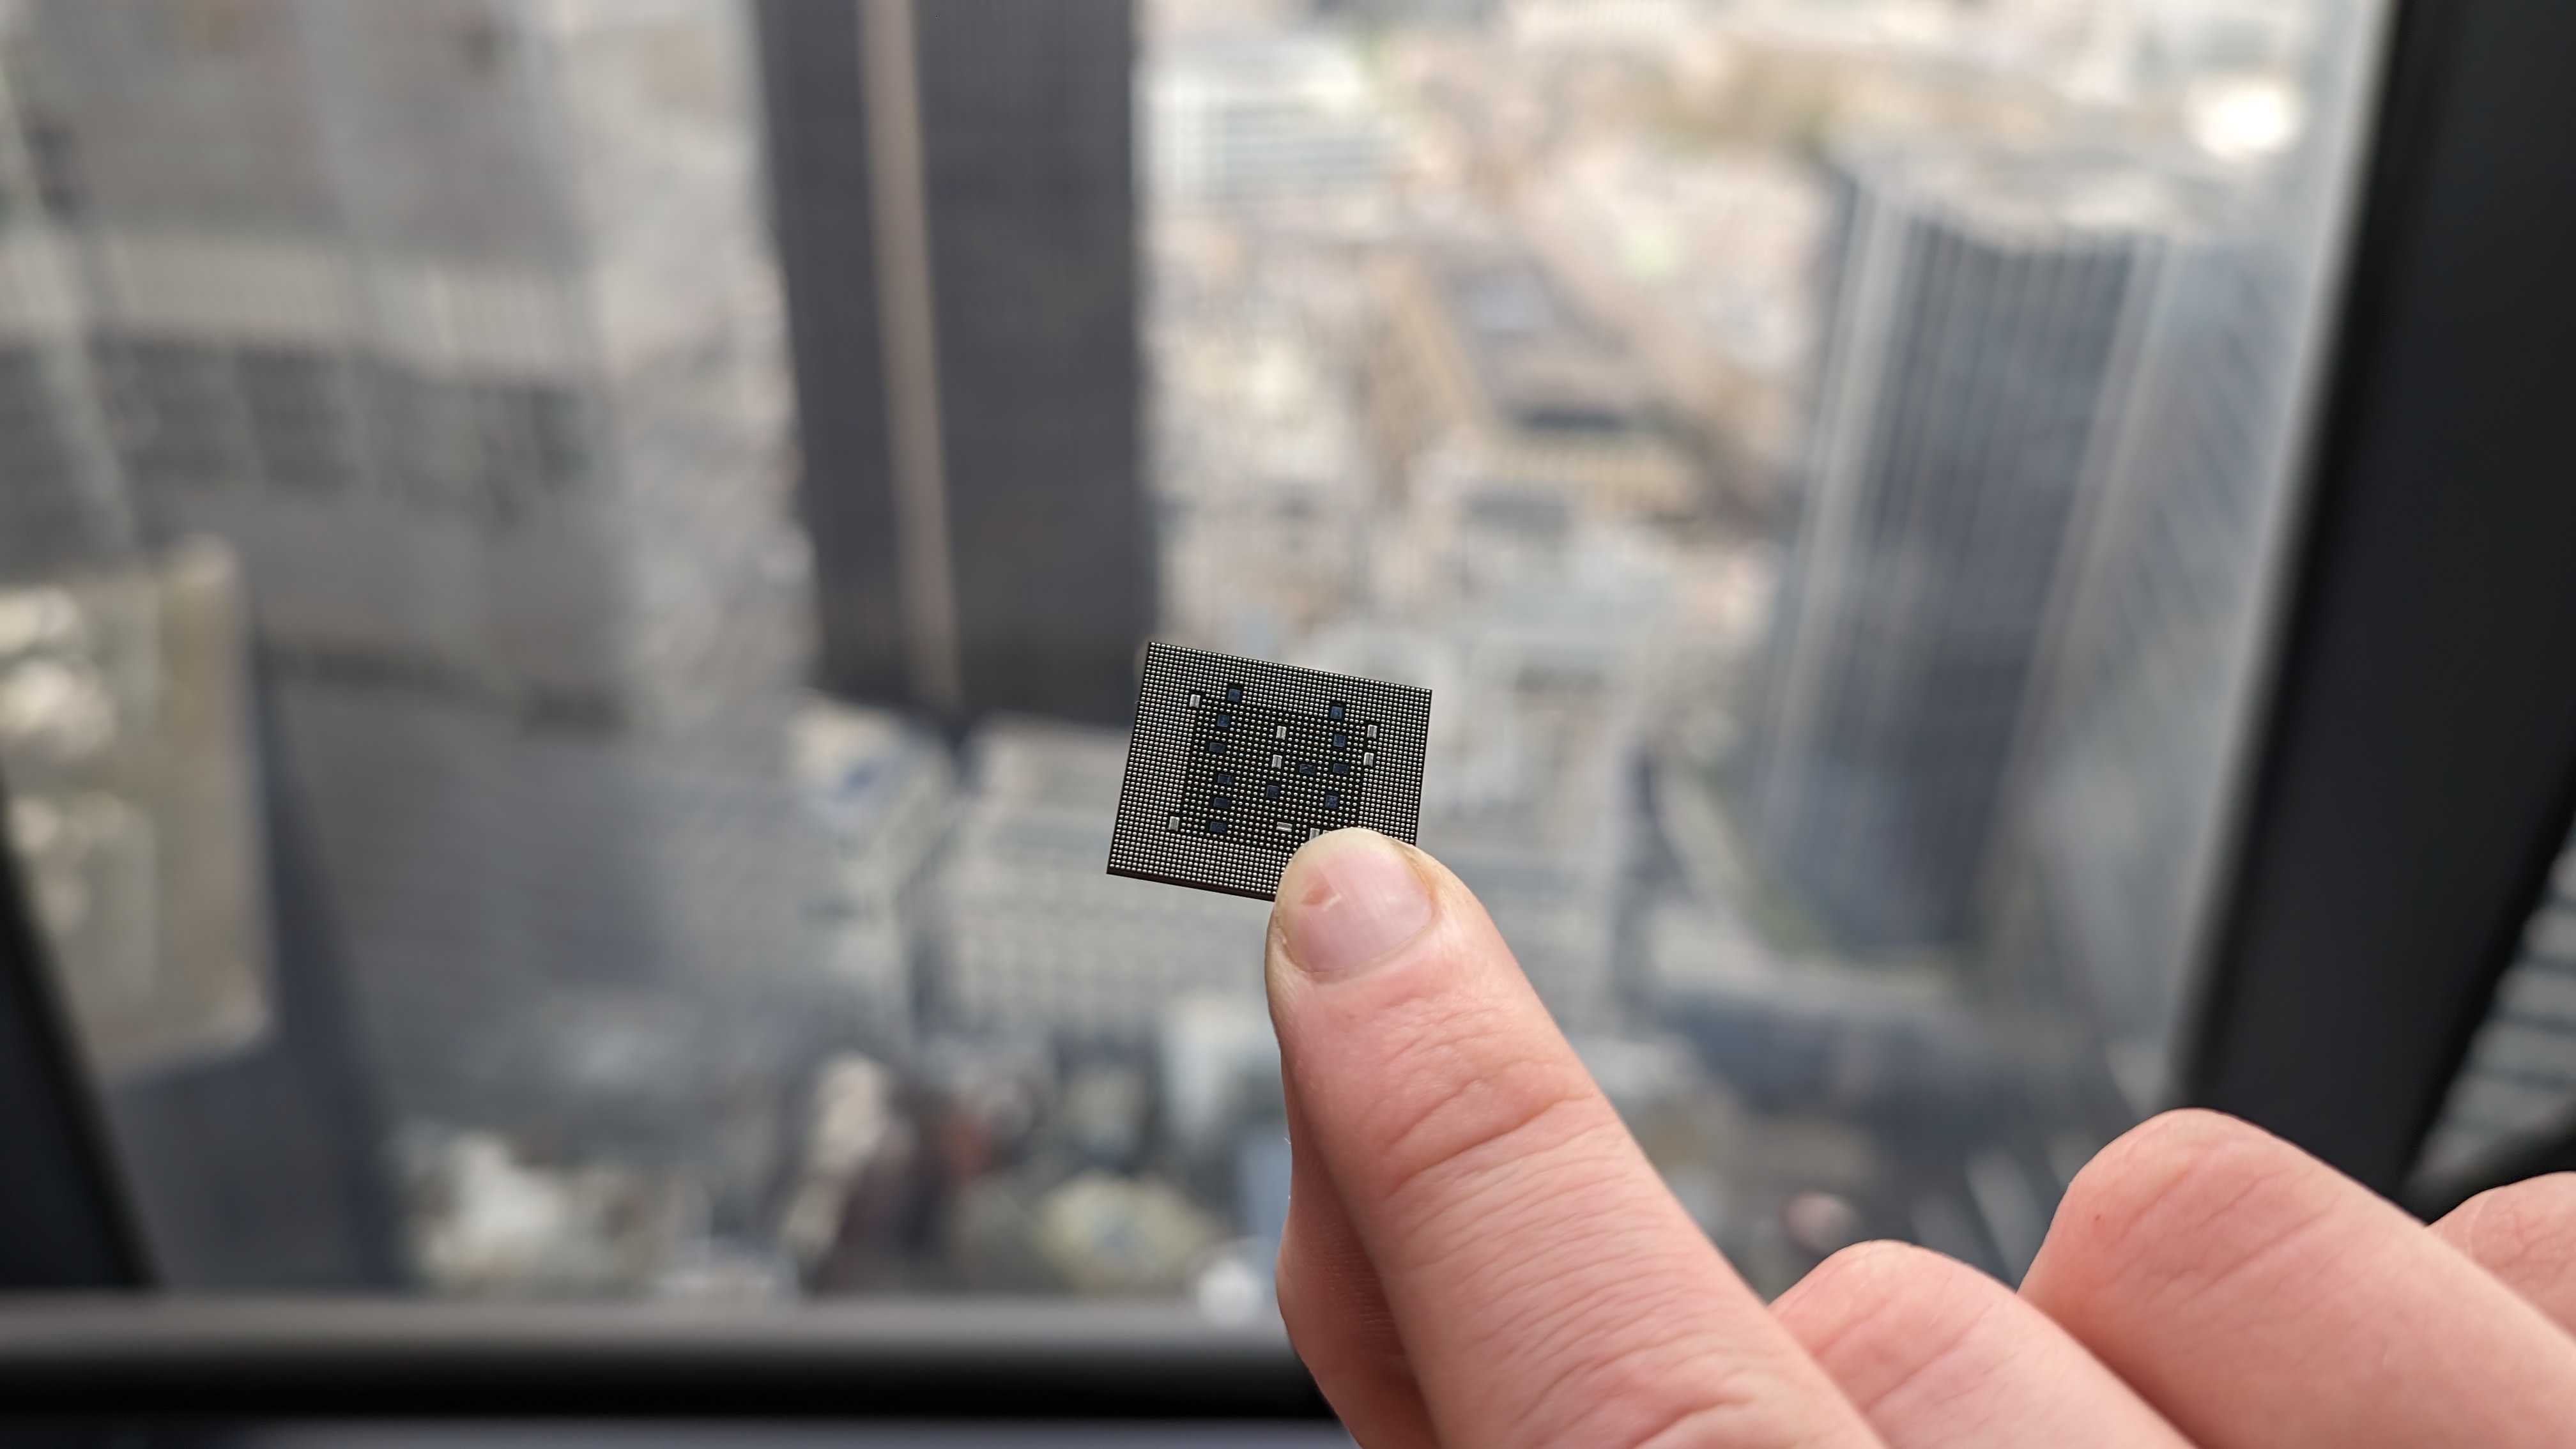 A Qualcomm Snapdragon X chip being held carefully in two fingers against a cityscape background.